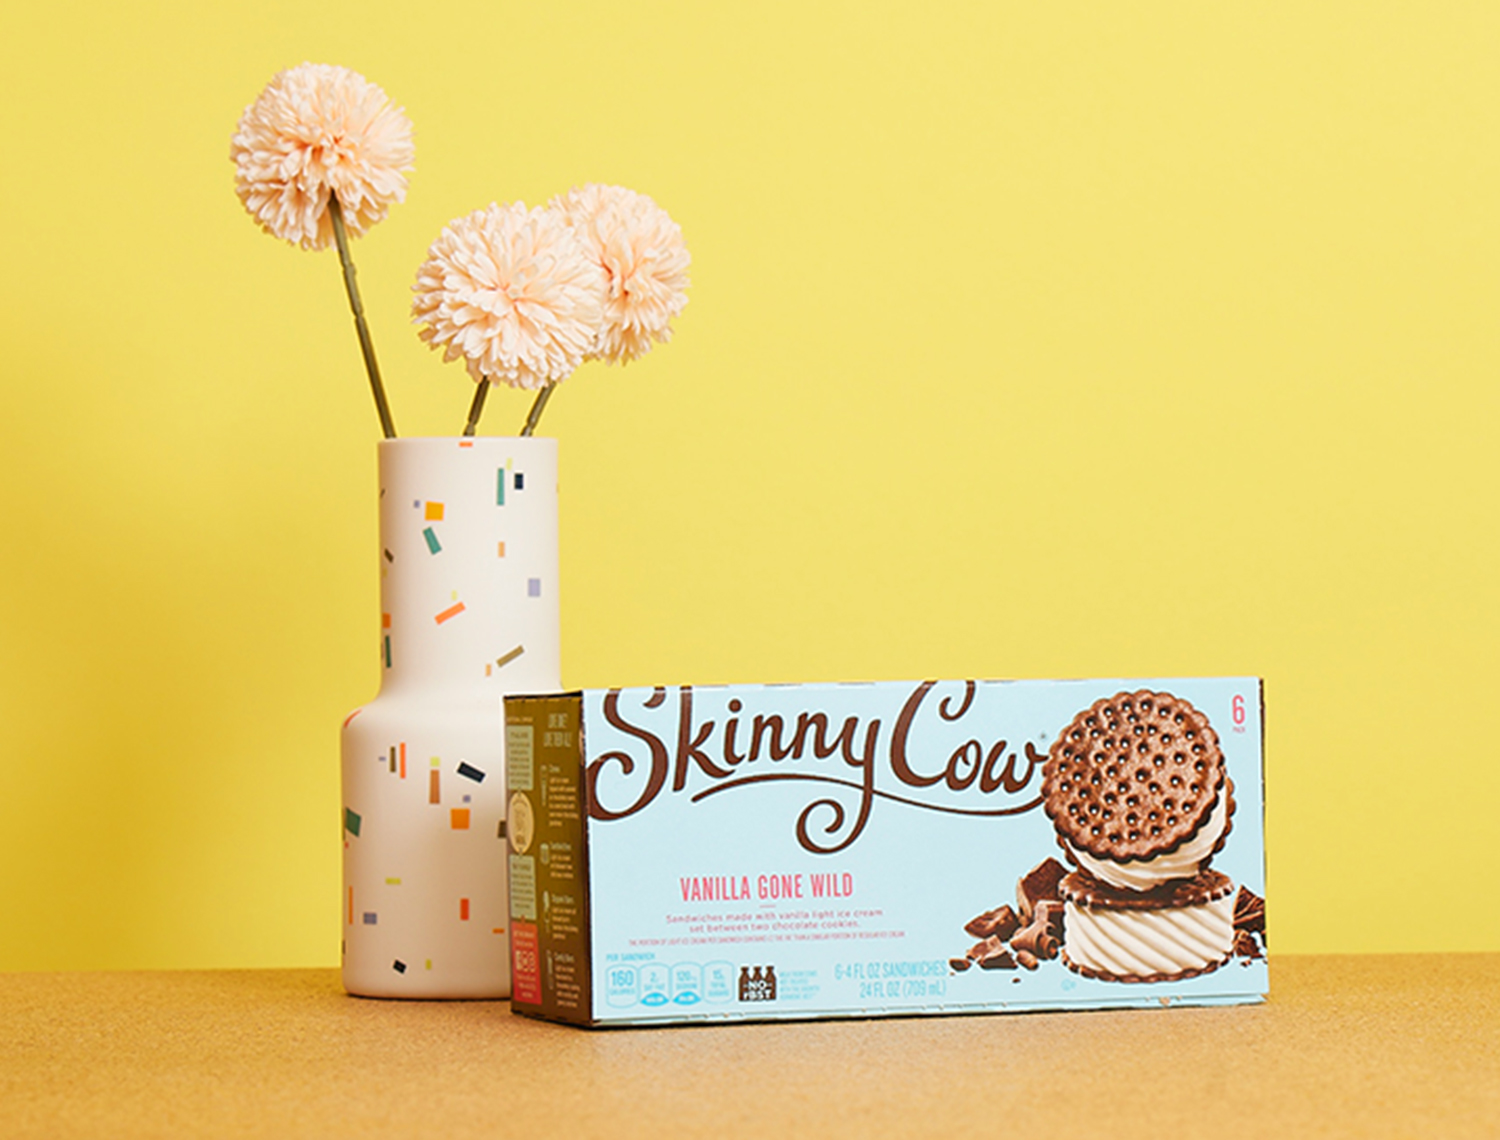 box of skinny cow vanilla gone wild ice cream bars on a yellow background with a vase and flowers